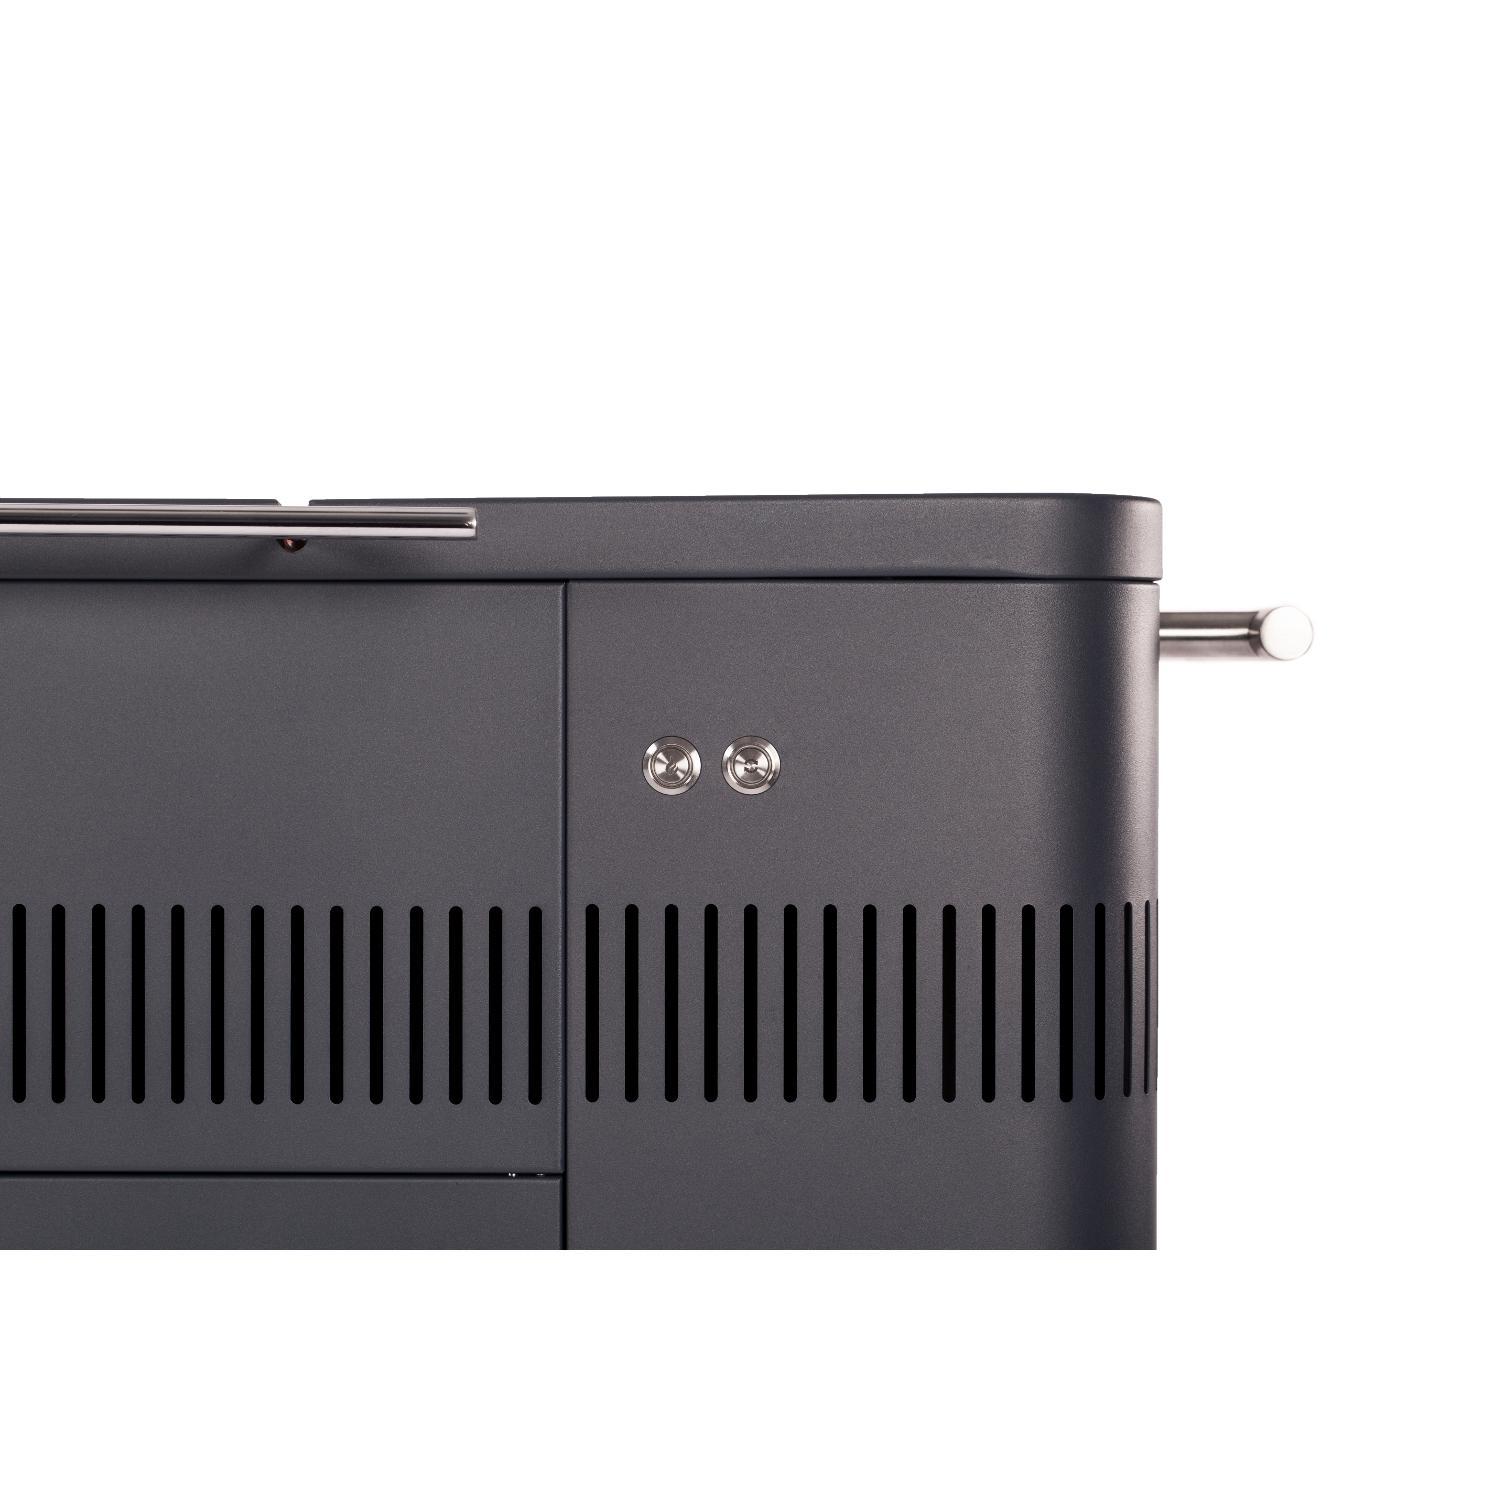 Everdure Charcoal Grill Everdure By Heston Blumenthal HUB 54-Inch Charcoal Grill With Rotisserie & Electronic Ignition